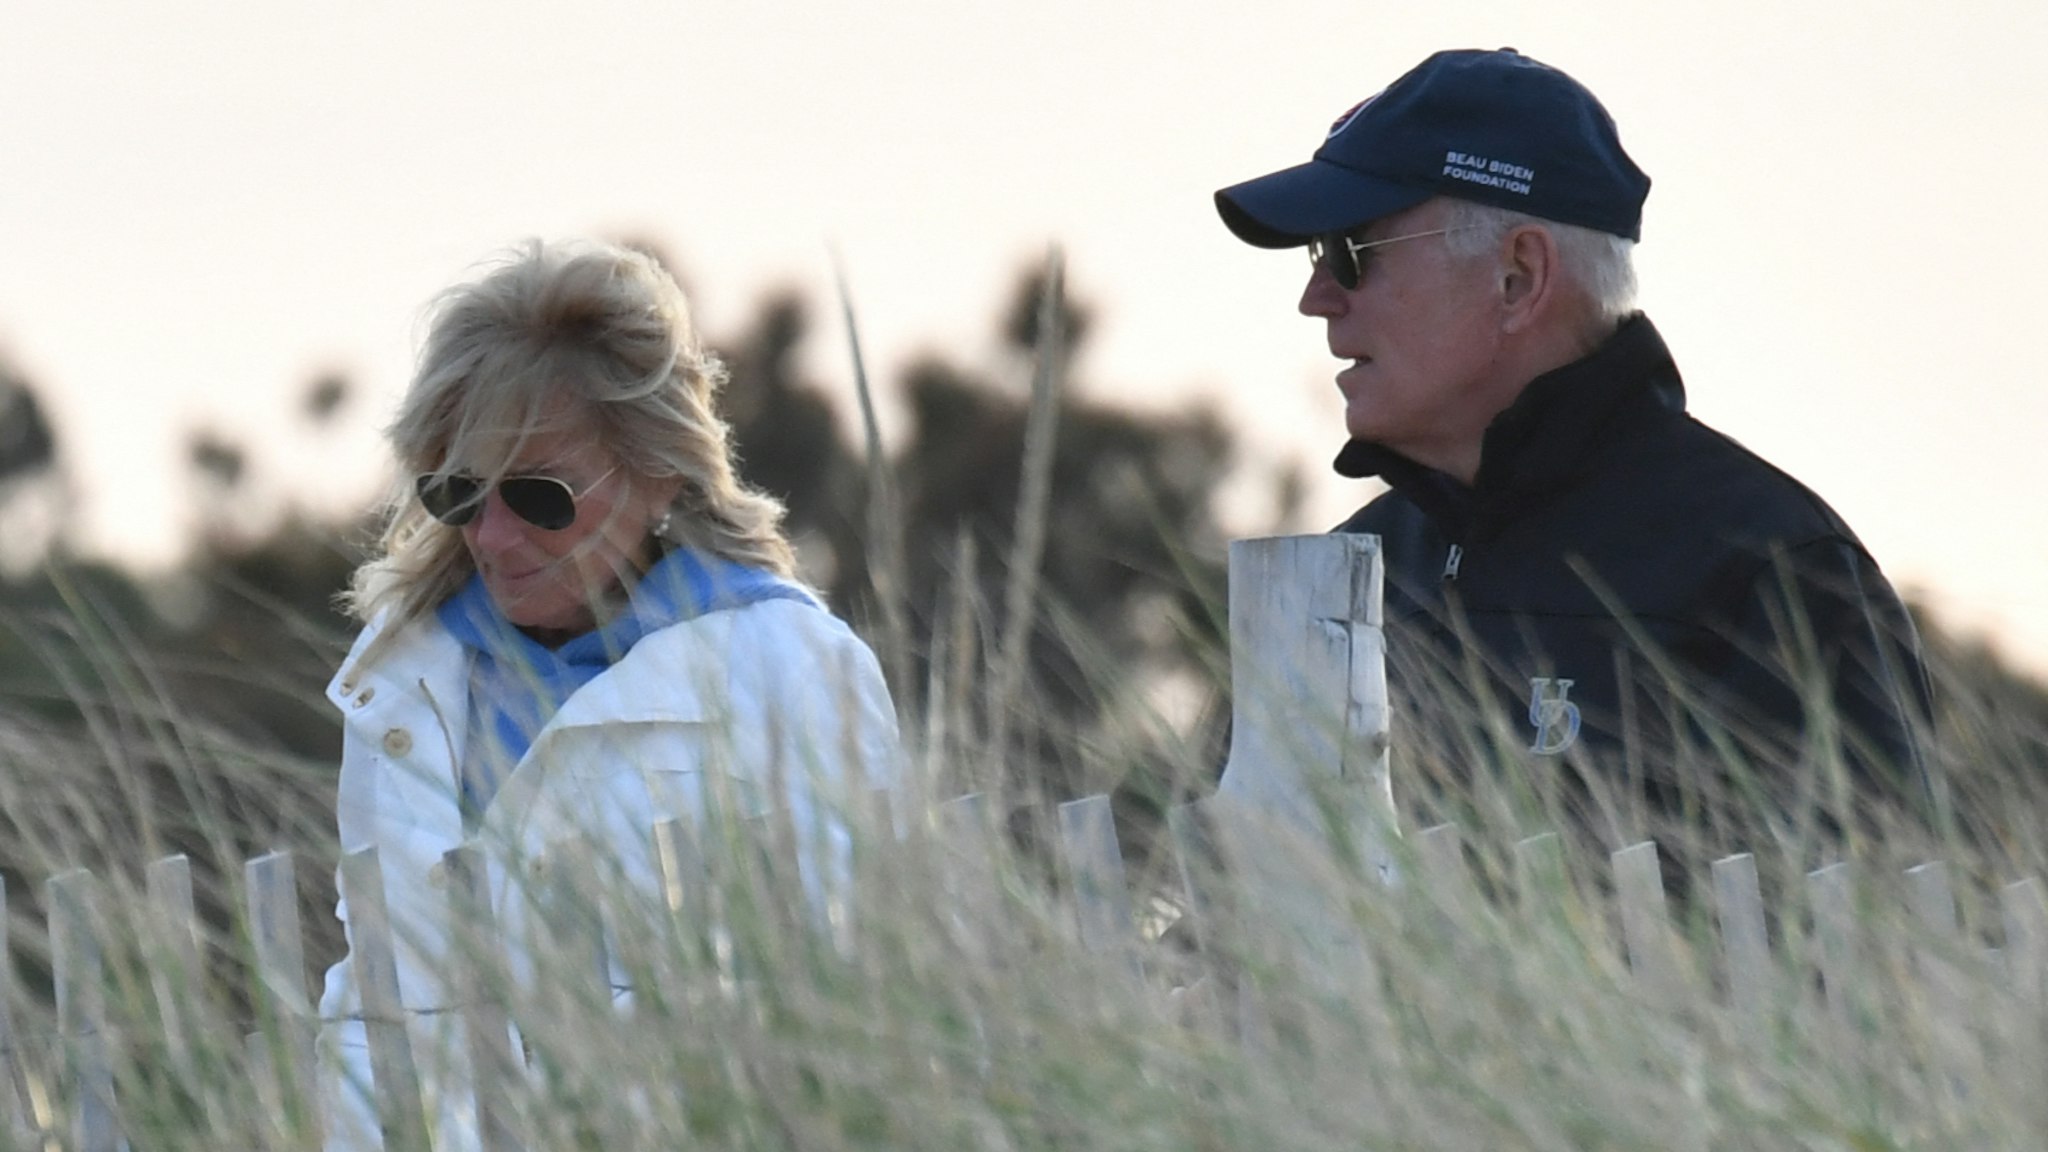 The Biden's vacation was briefly interrupted when a small plane strayed into restricted airspace above their Rehoboth Beach, Delaware home.